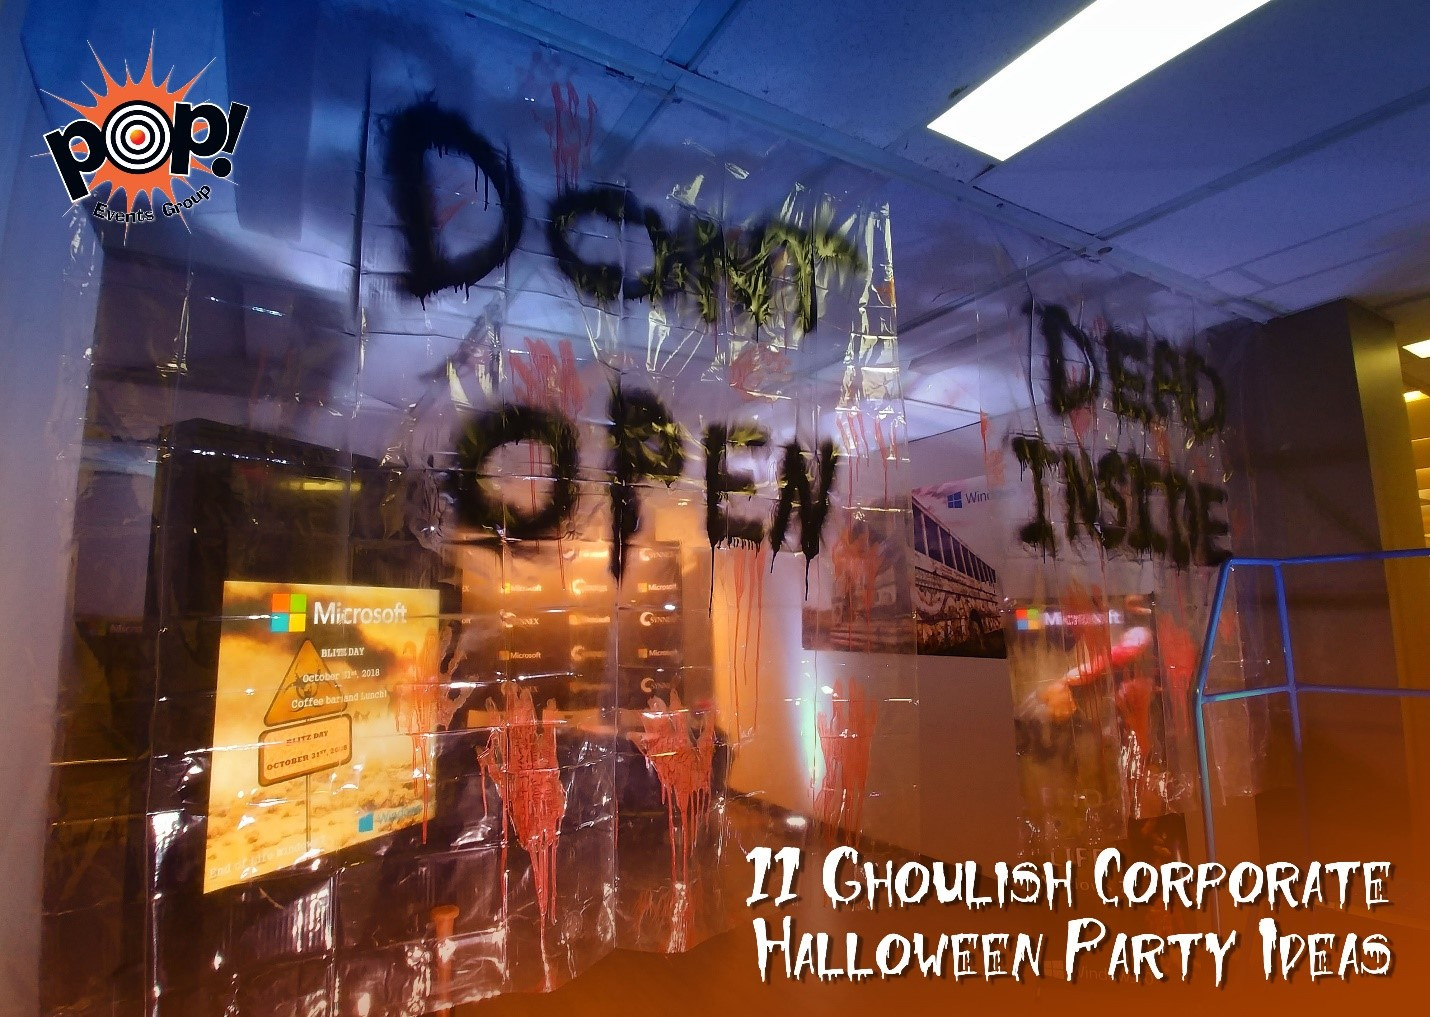 Corporate Halloween Party Ideas
 11 Ghoulish Corporate Halloween Party Ideas